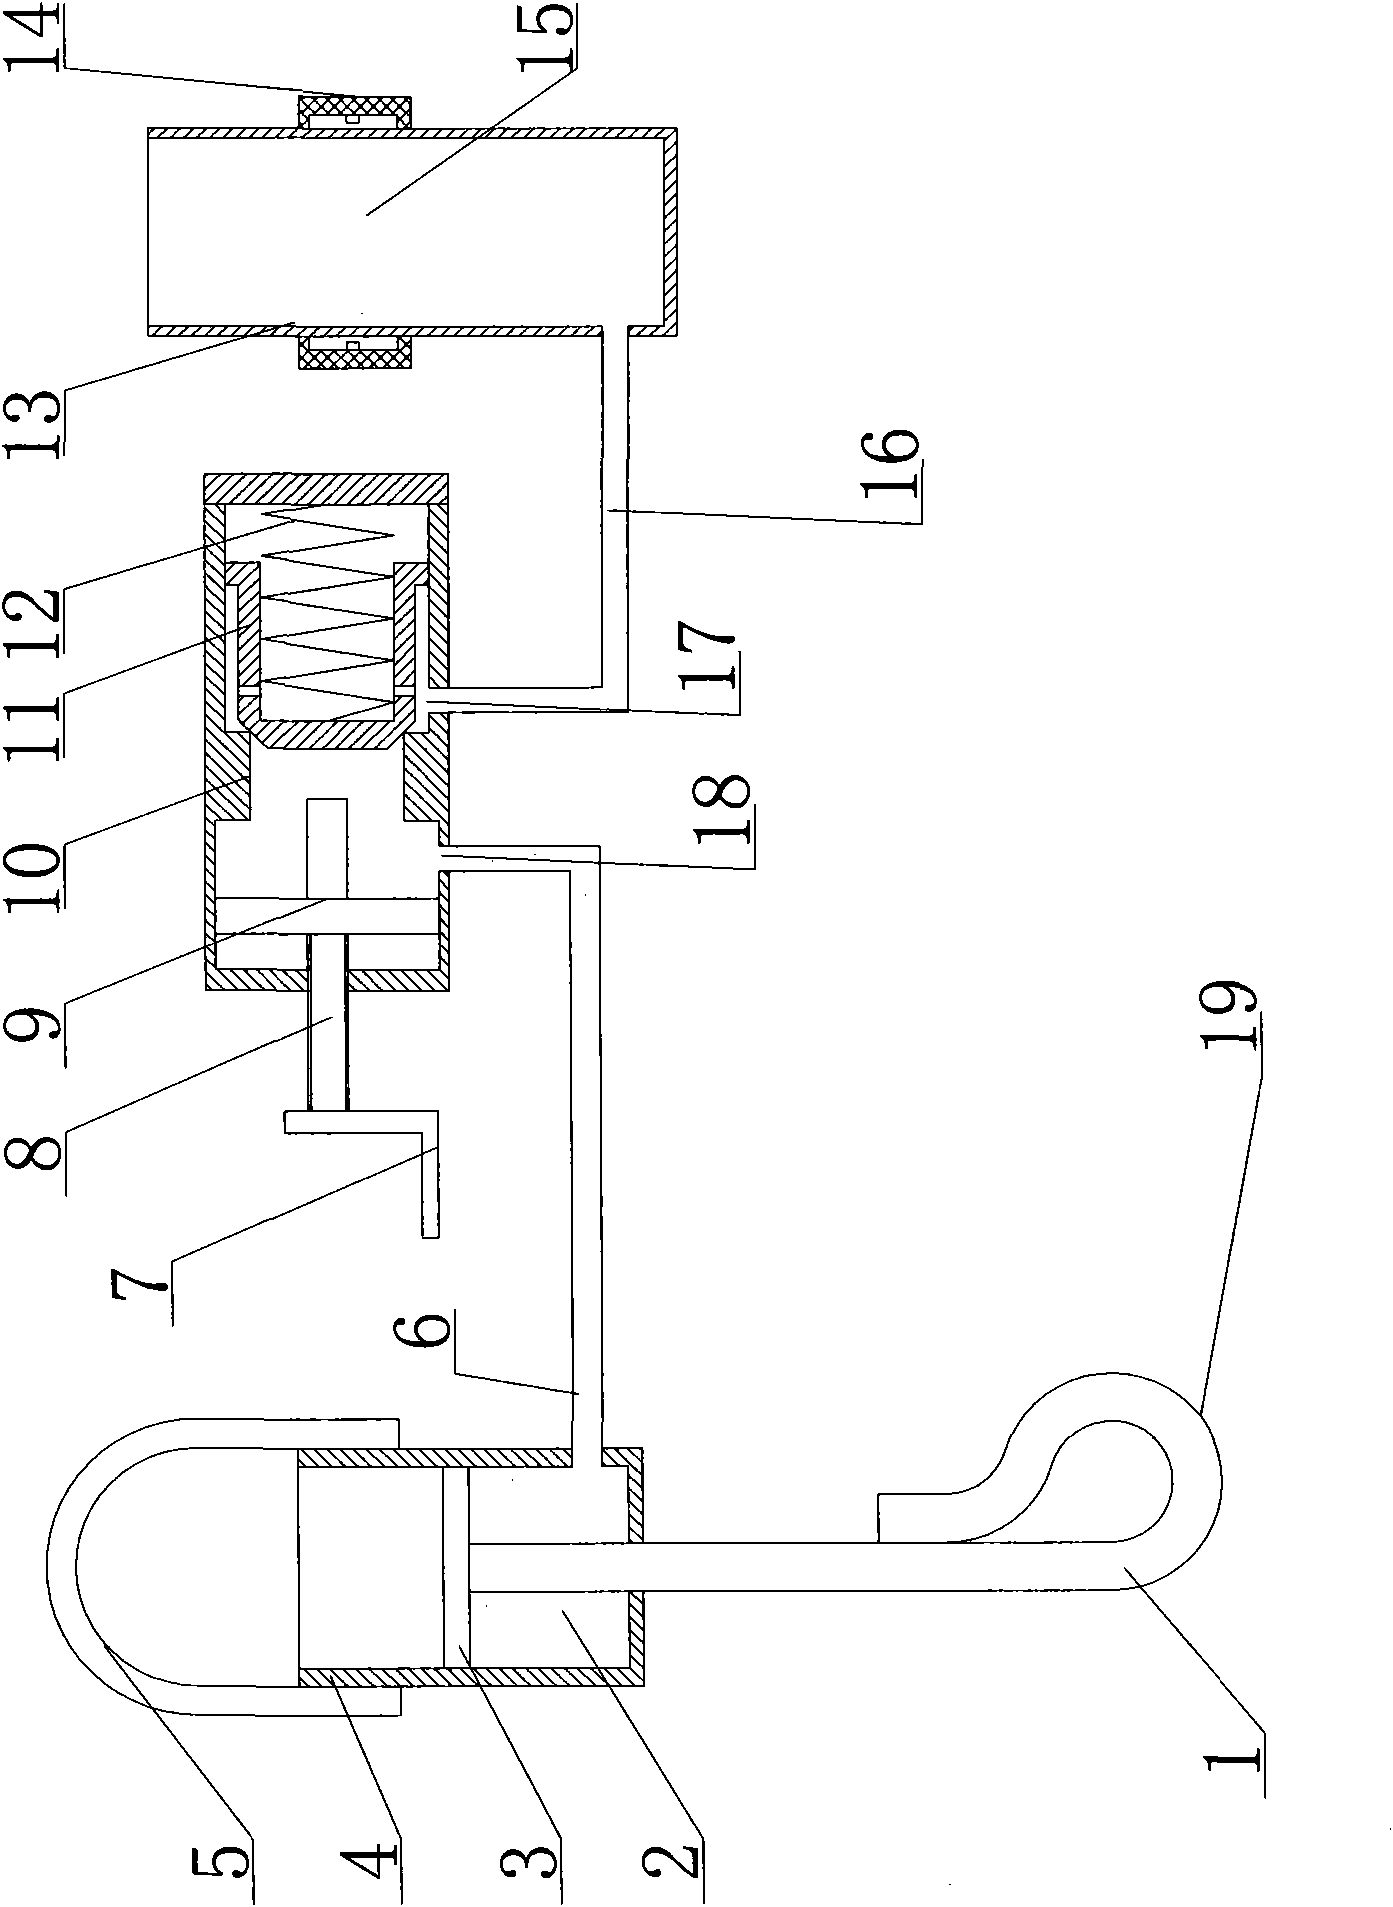 Load control device for attached lifting scaffold